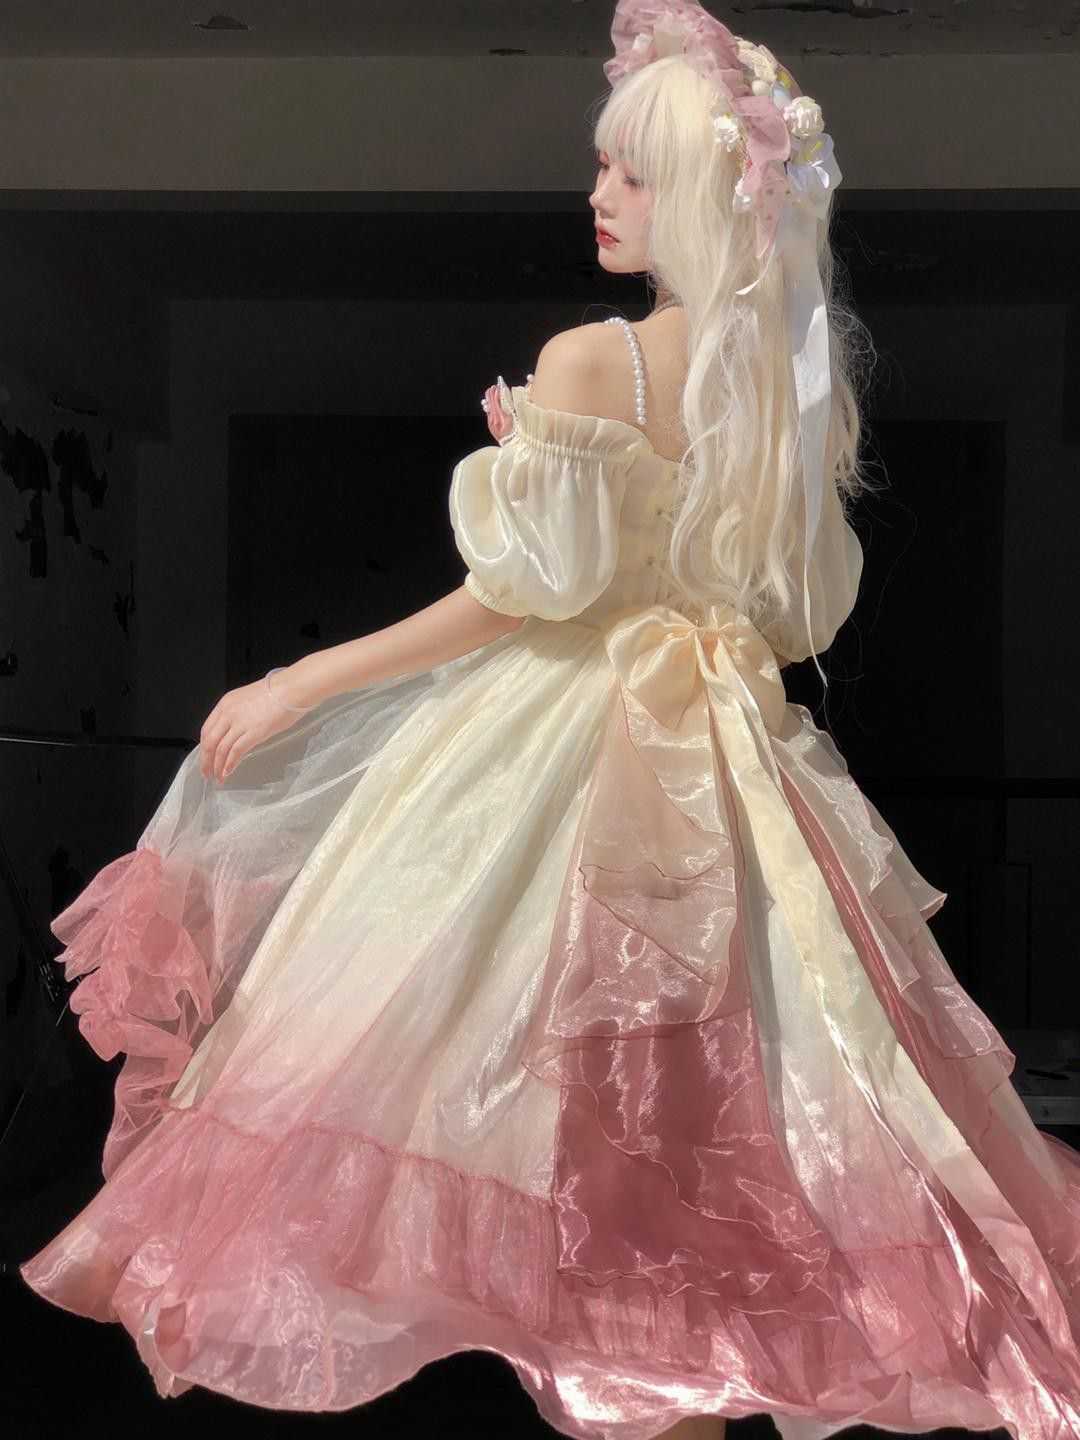 Roses Flowers Masquerade Prom Dress Champagne Pink Gradient Floral Wedding Dress Vintage Princess Dress with Pearls Y2401